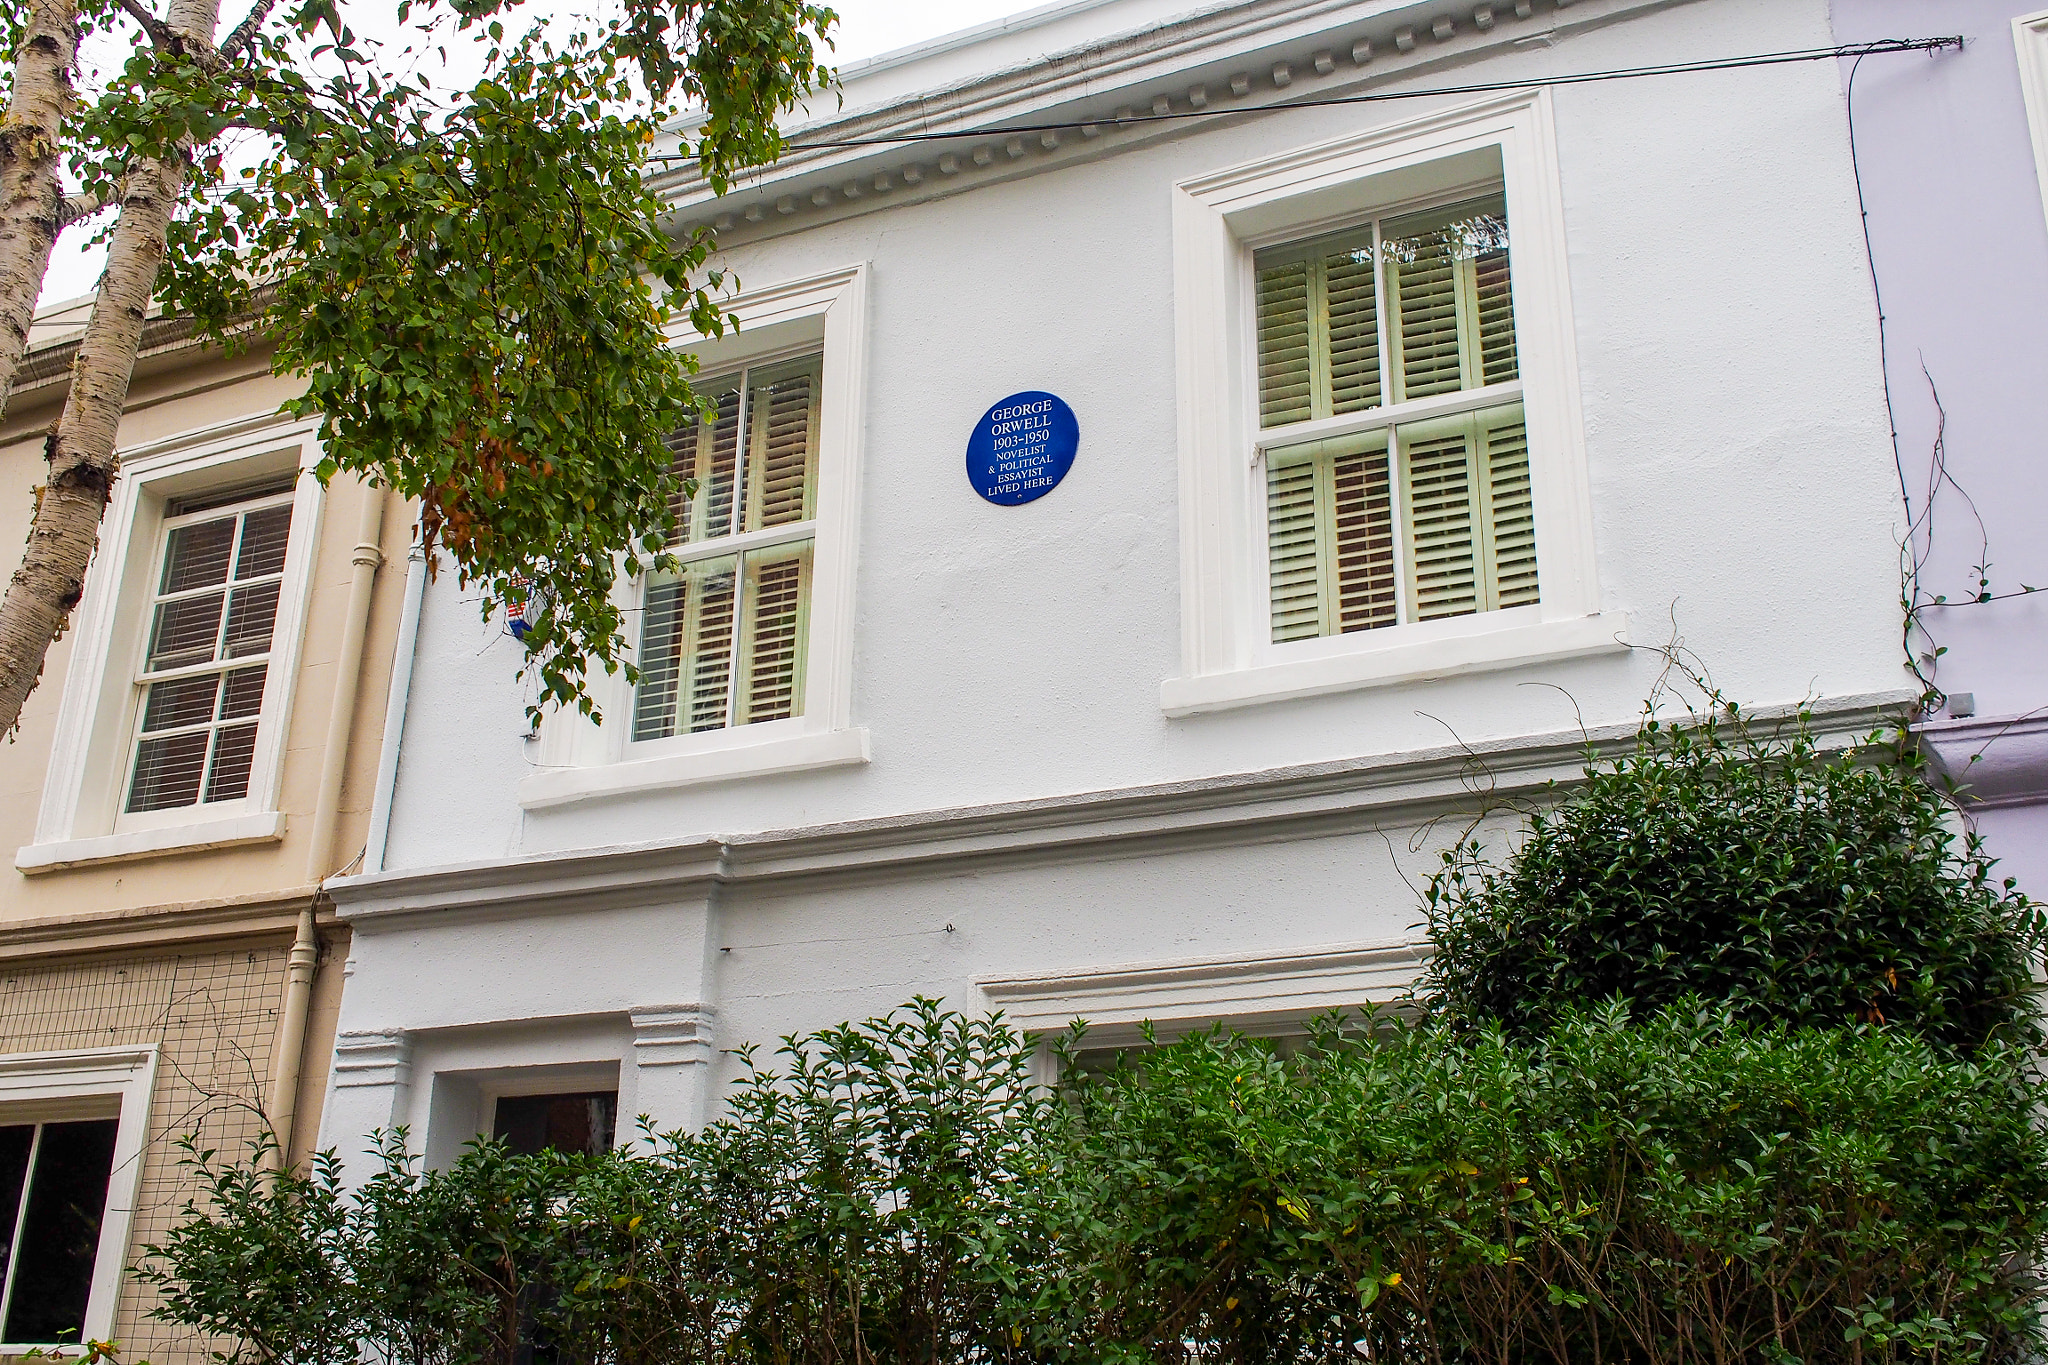 George Orwell lived here